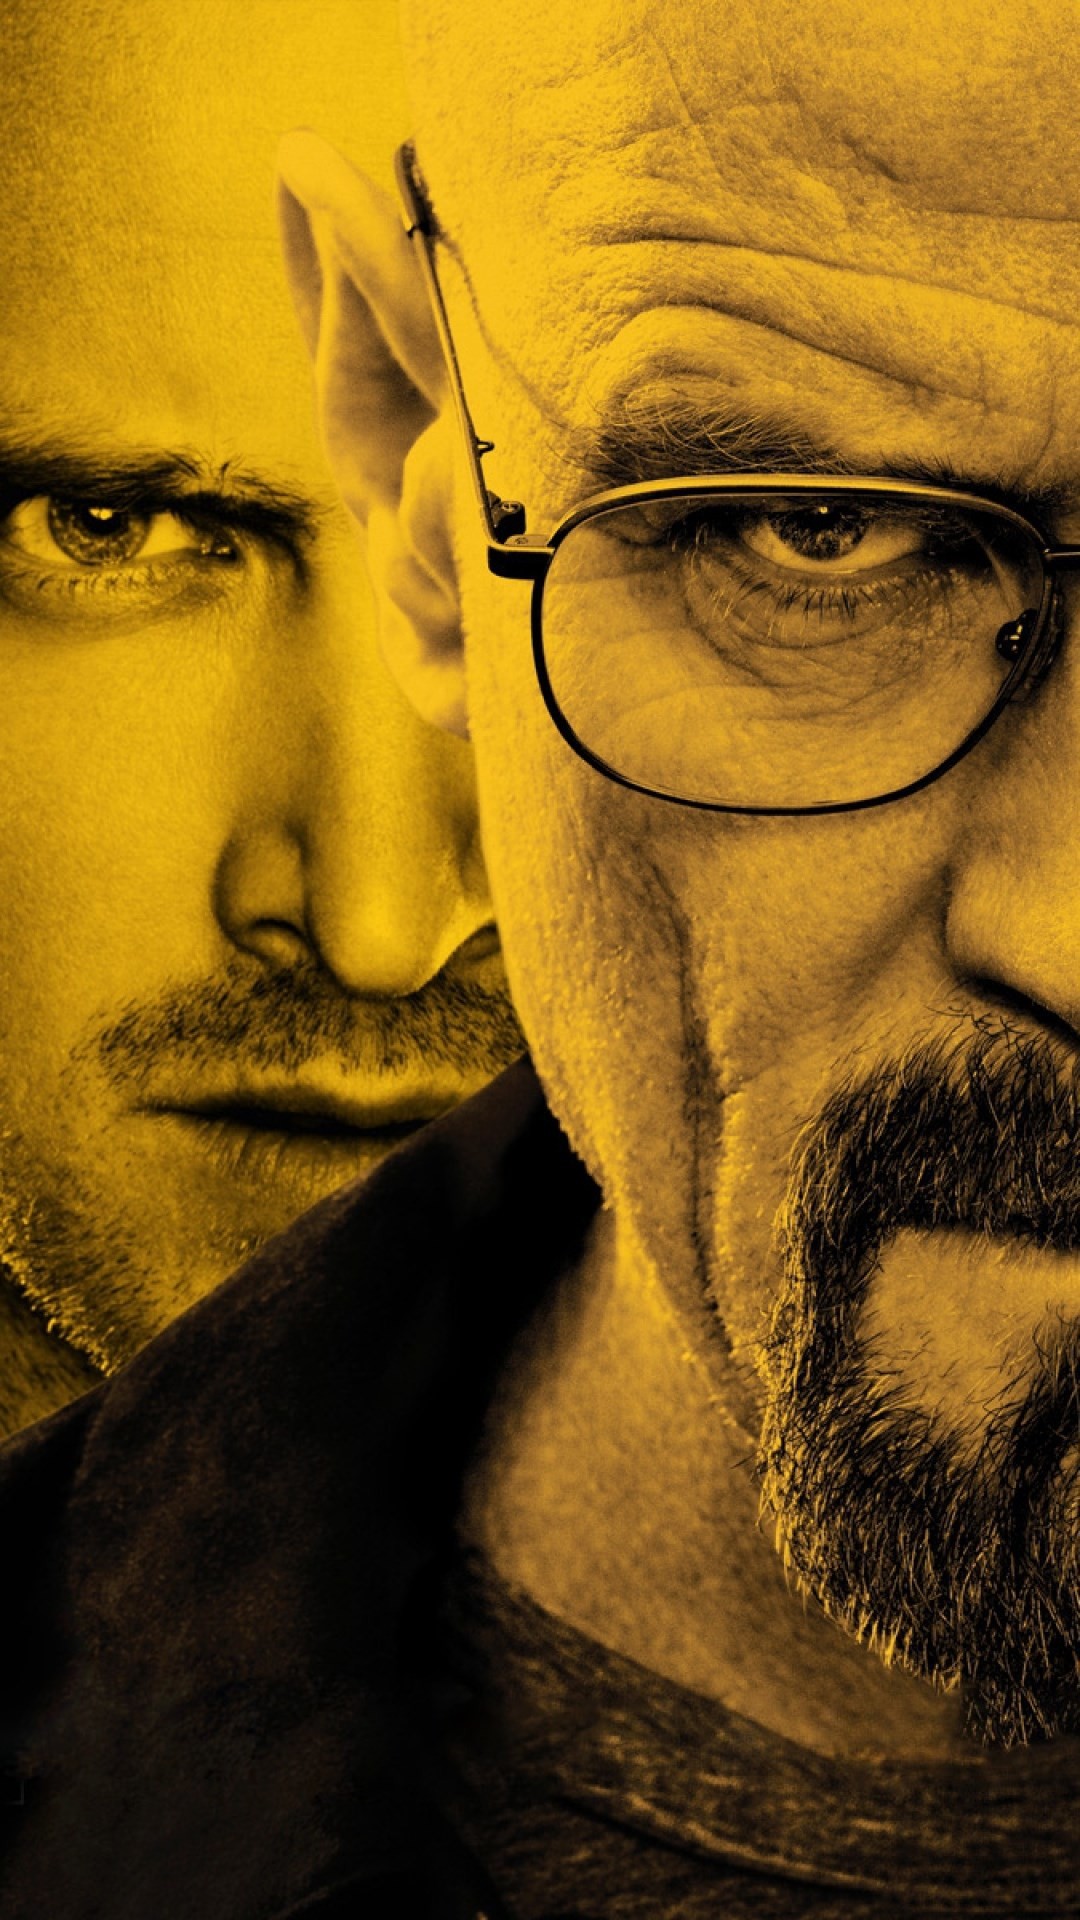 1080x1920 breaking bad wallpaper for iphone download free